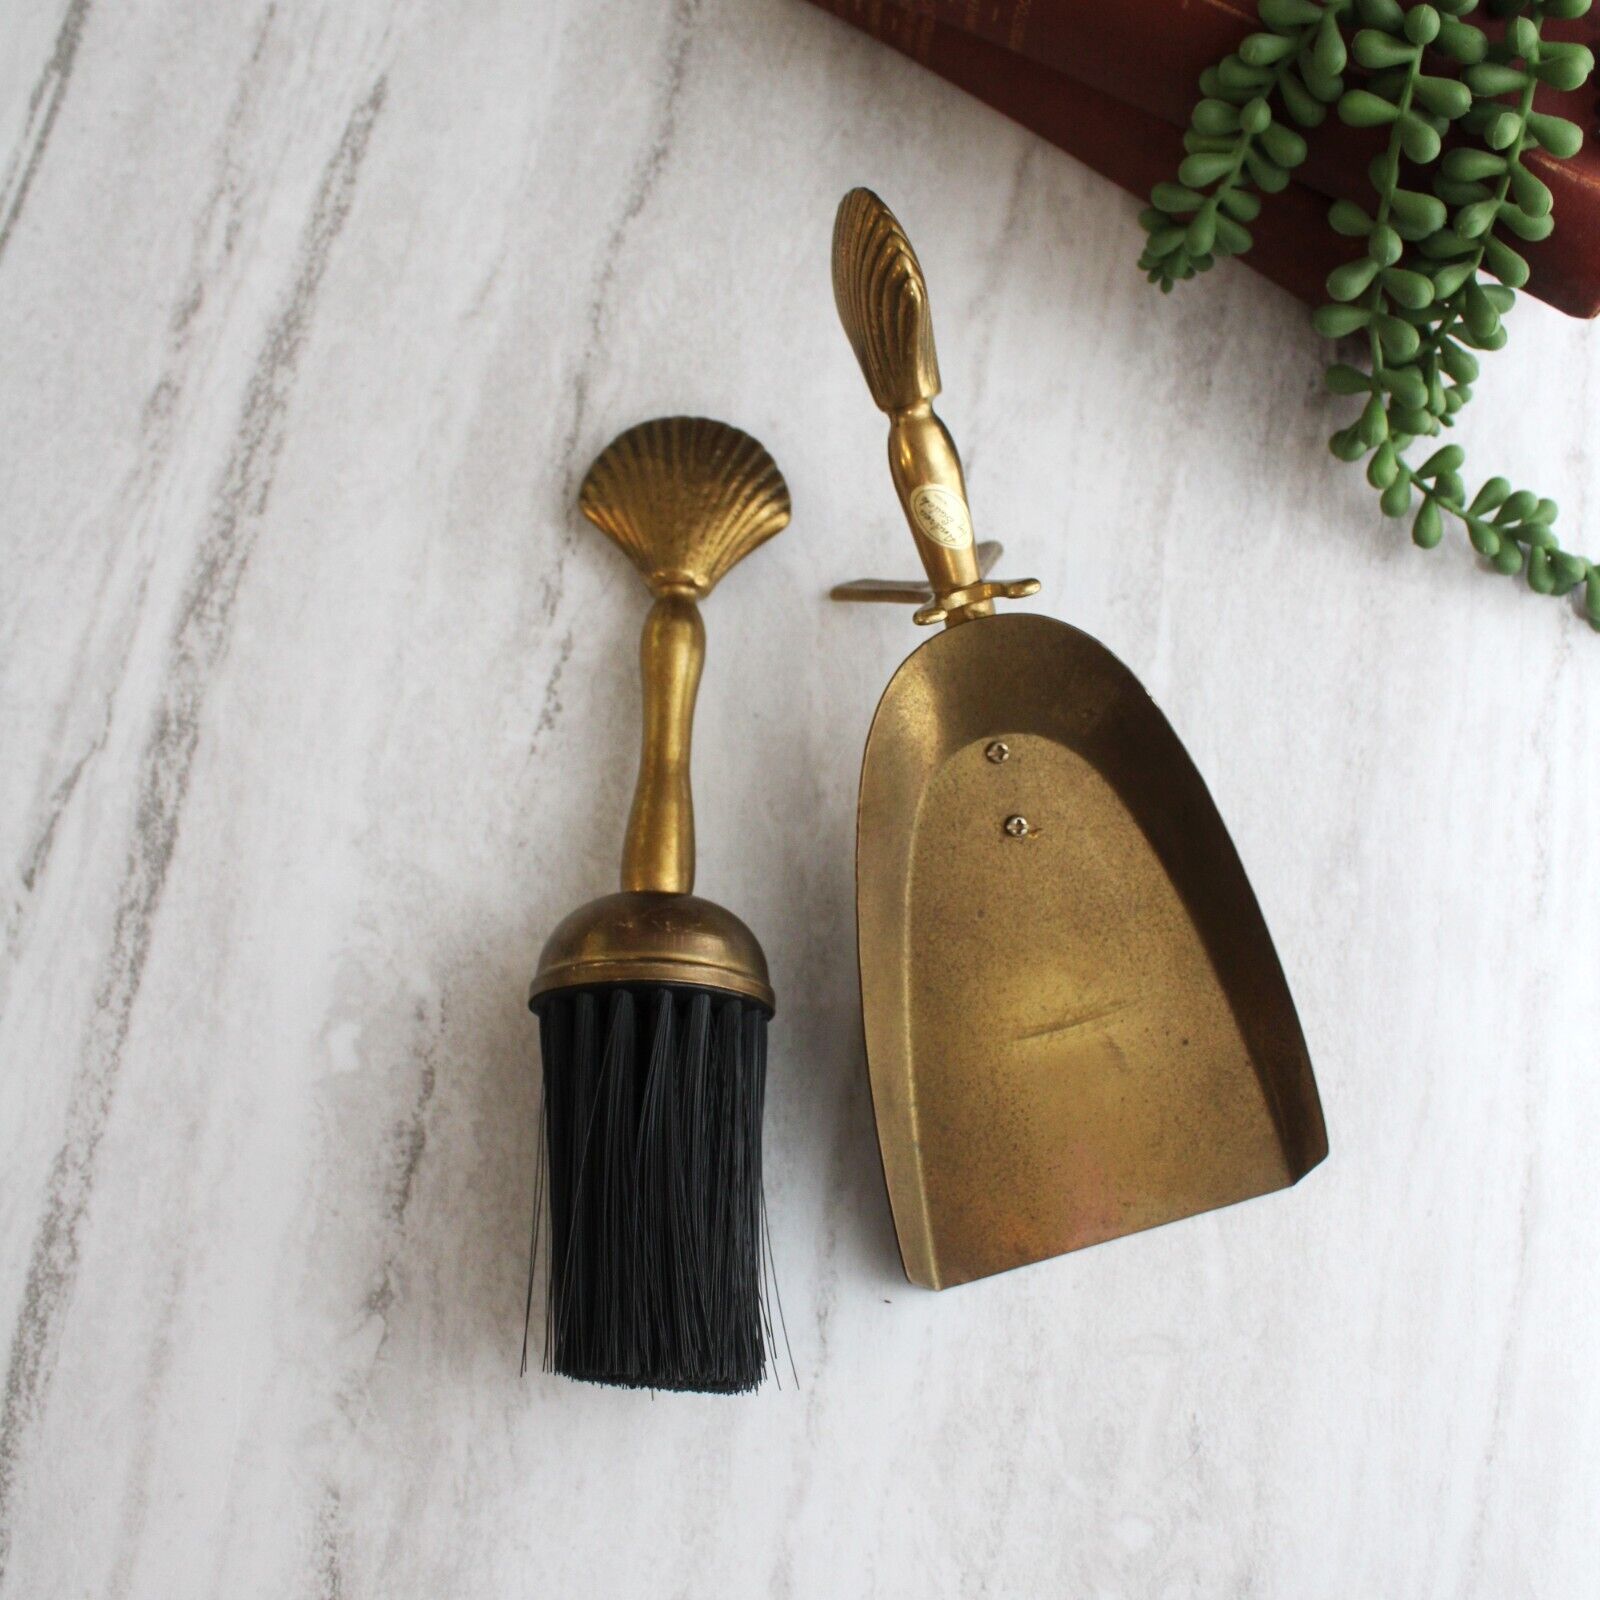 Vintage Brass Shell Fireplace Brush and Dust Pan, Crumb Catcher, Butlers Broom.